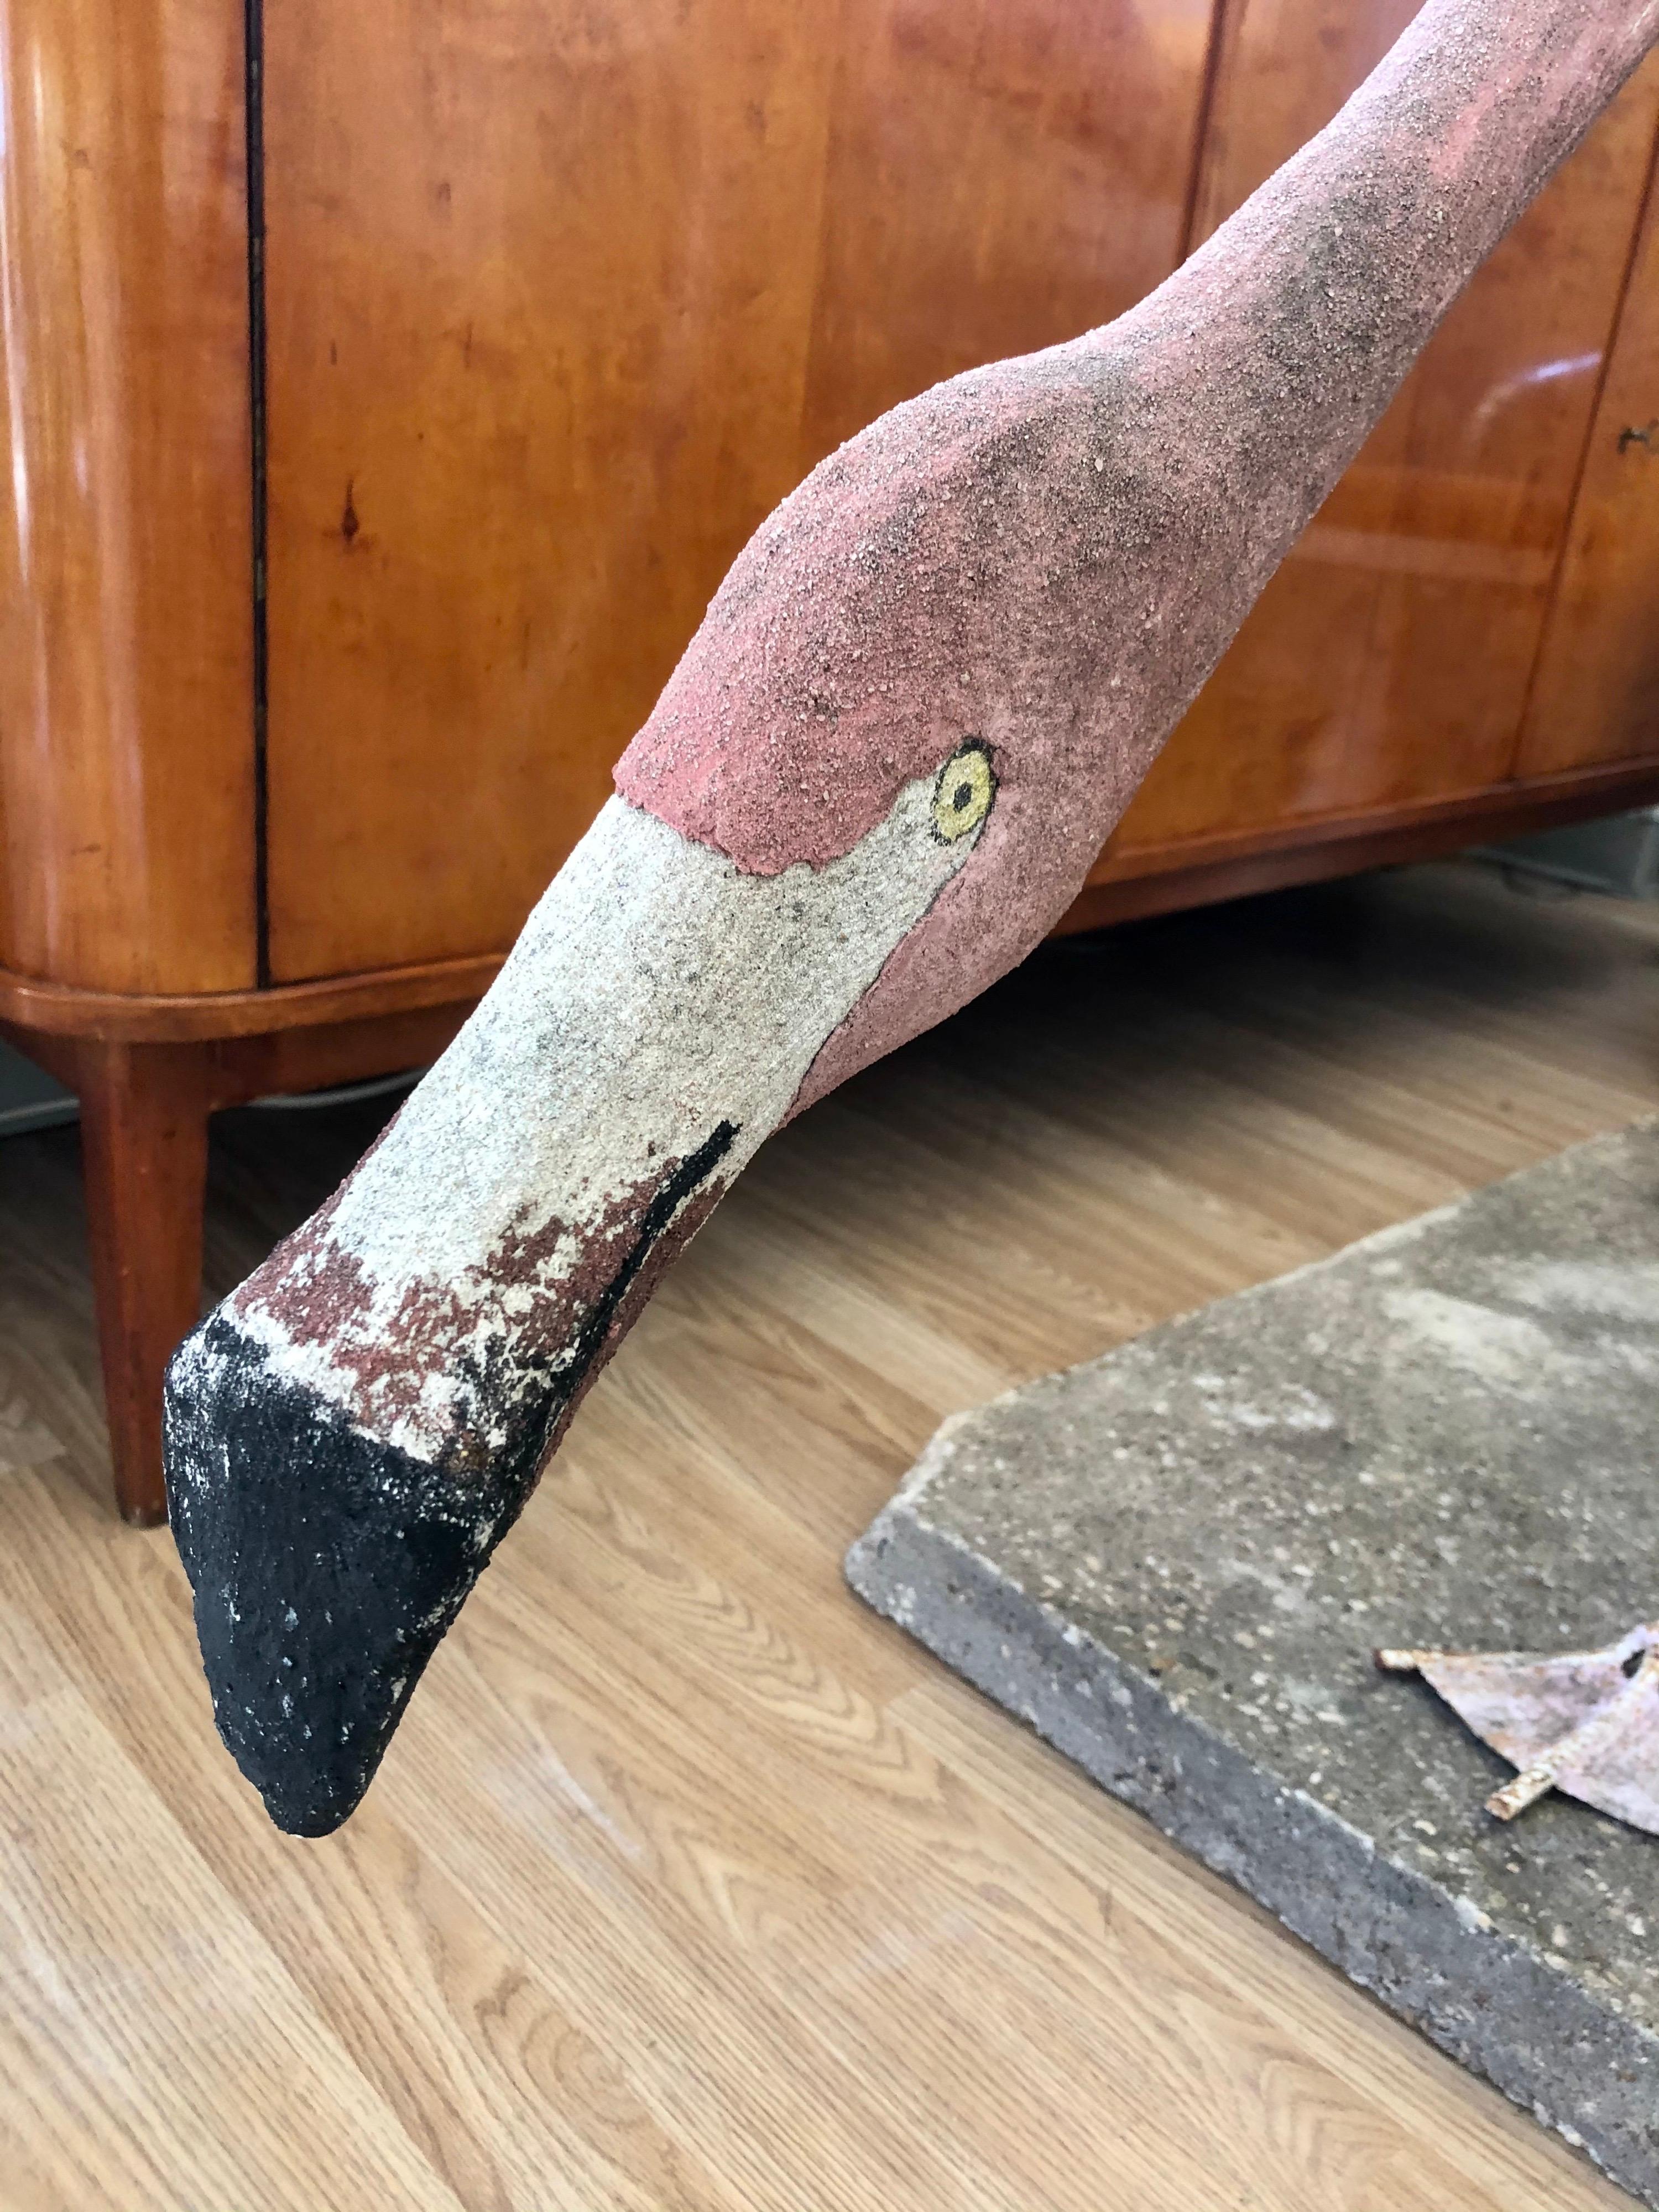 Designed by Jorge Mercado, this flamingo is in overall good condition. Pink and white. Concrete. Rebar legs. See photos for surface condition.
Dimensions:
56